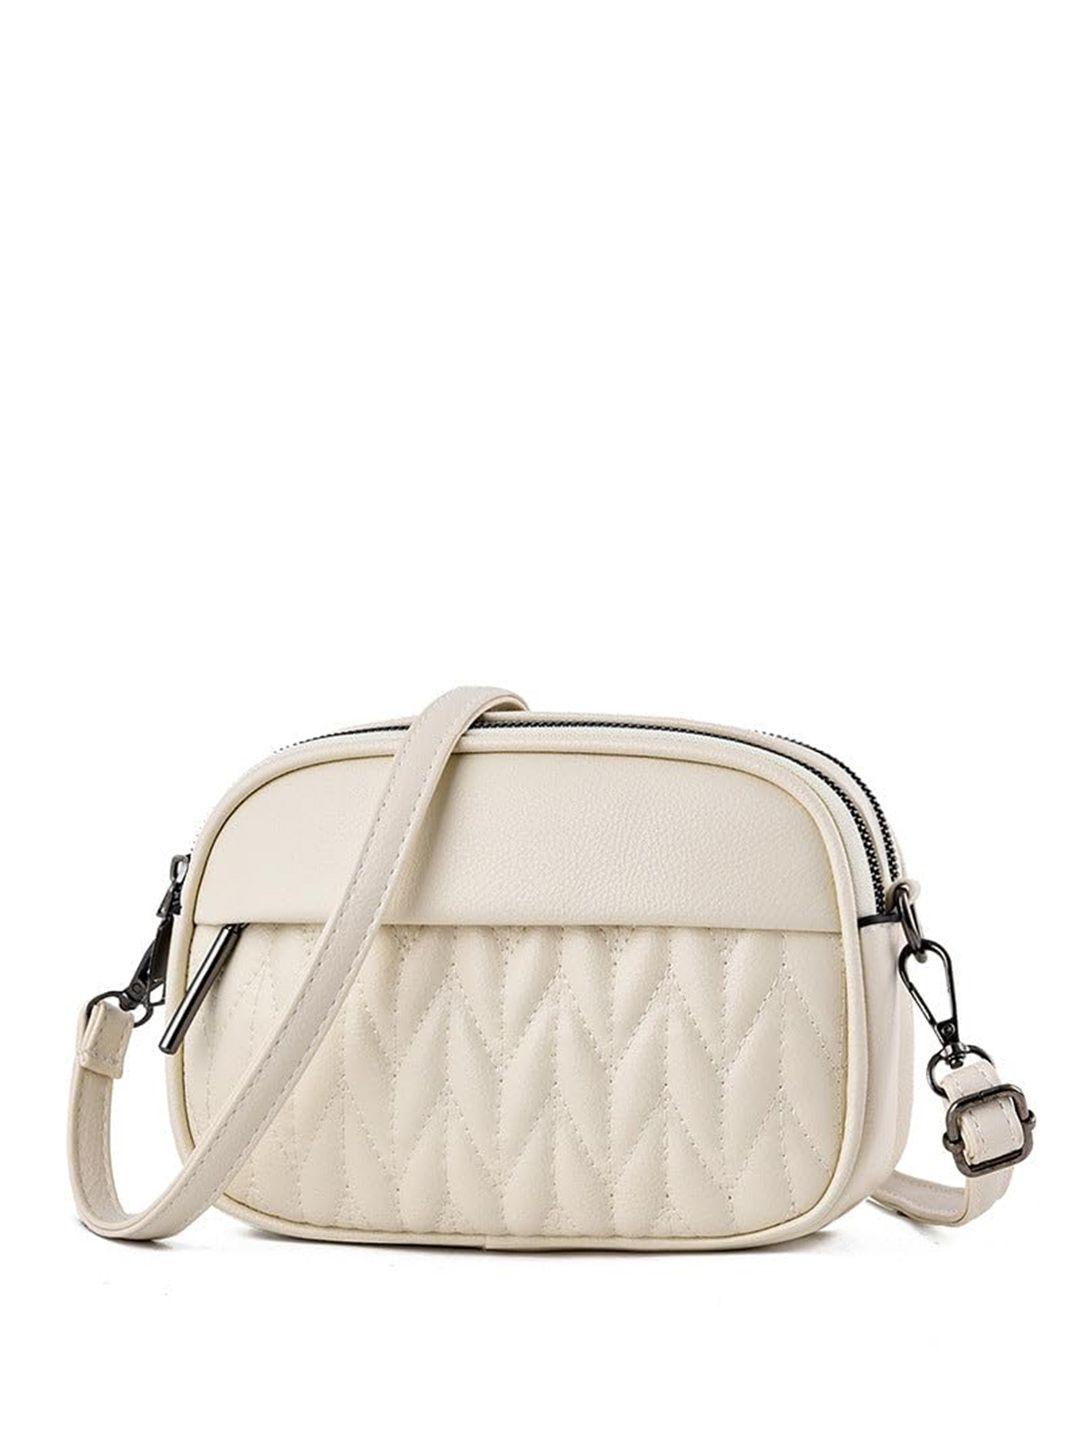 syga leather structured sling bag with quilted